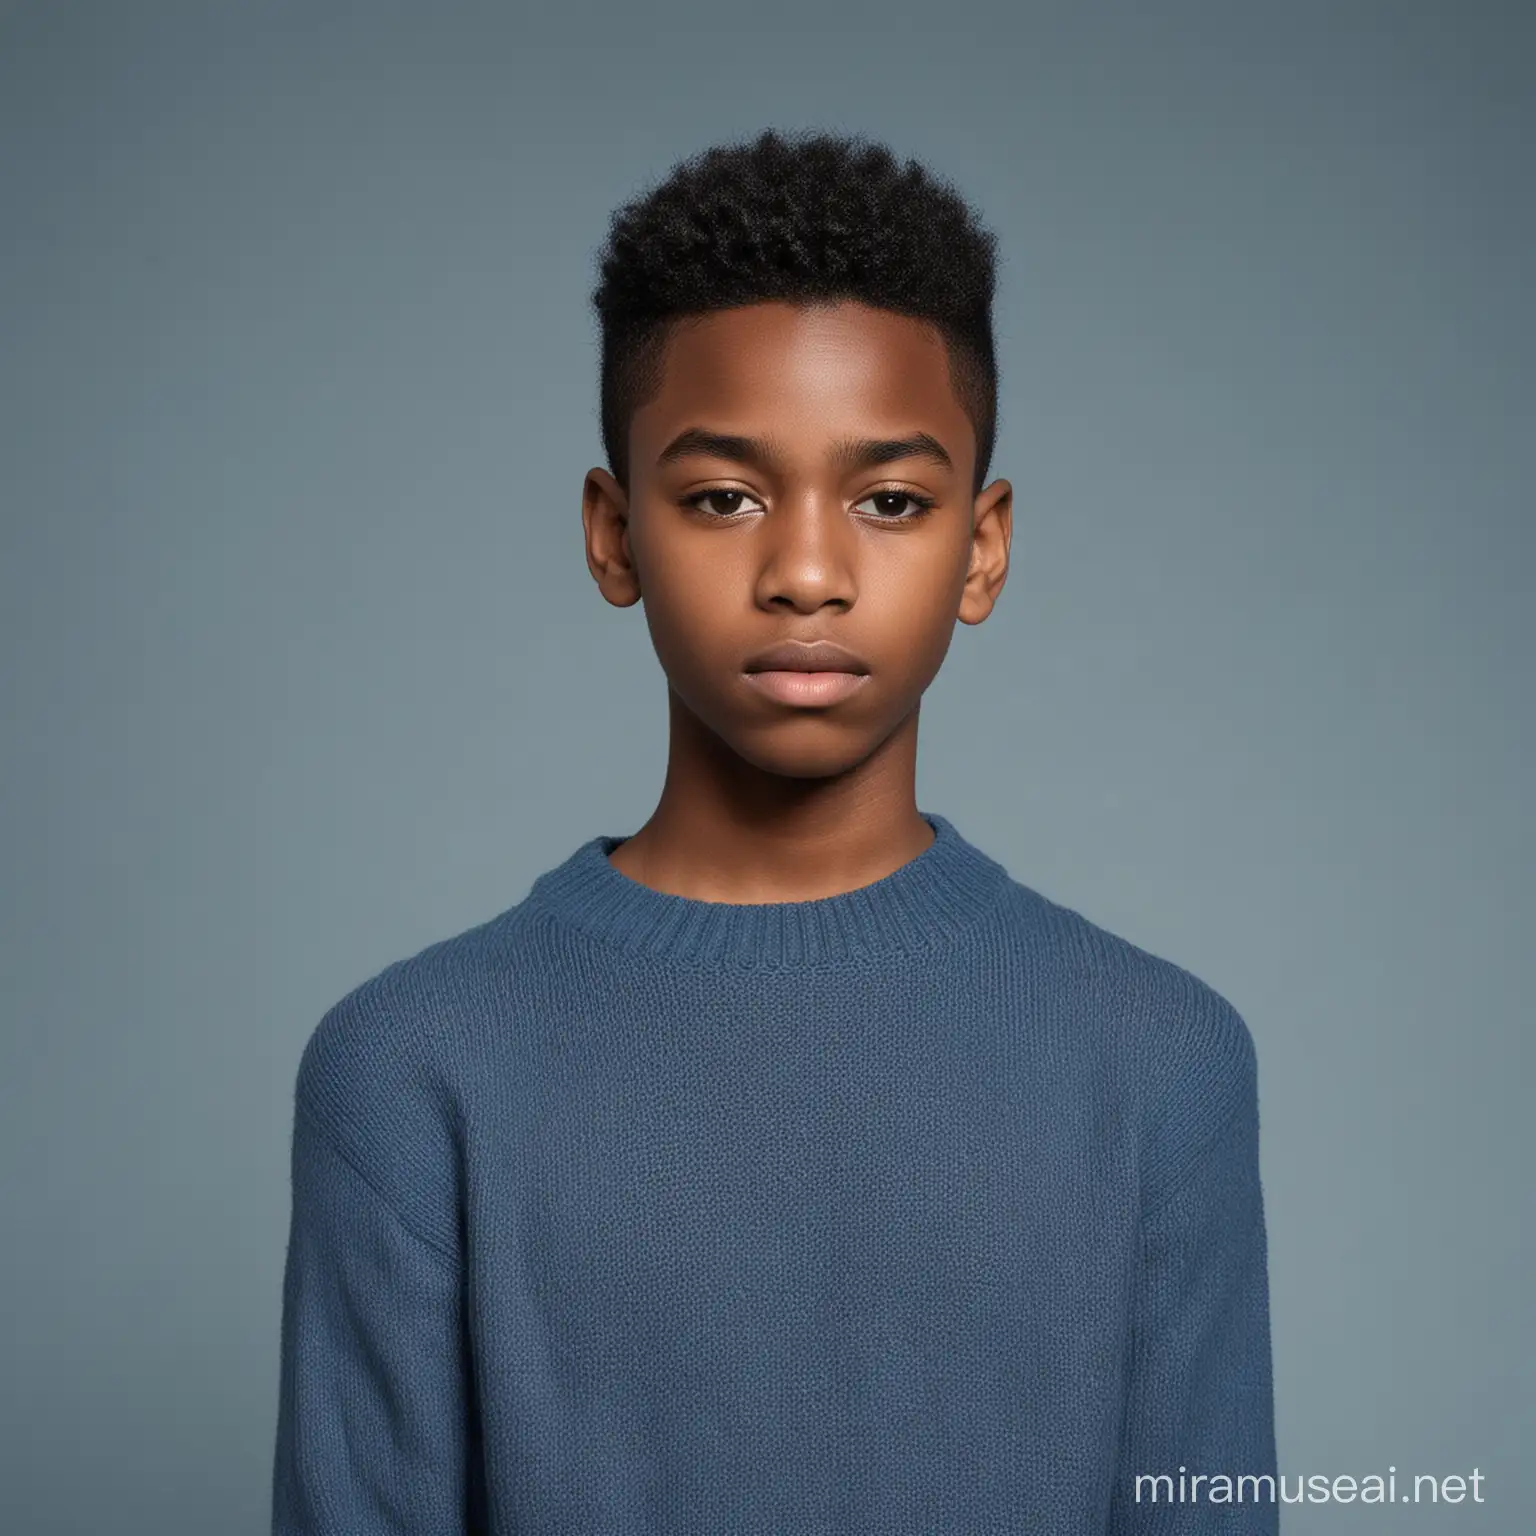 African Teenage Boy in Blue Sweater Portrait of Sadness and Weariness